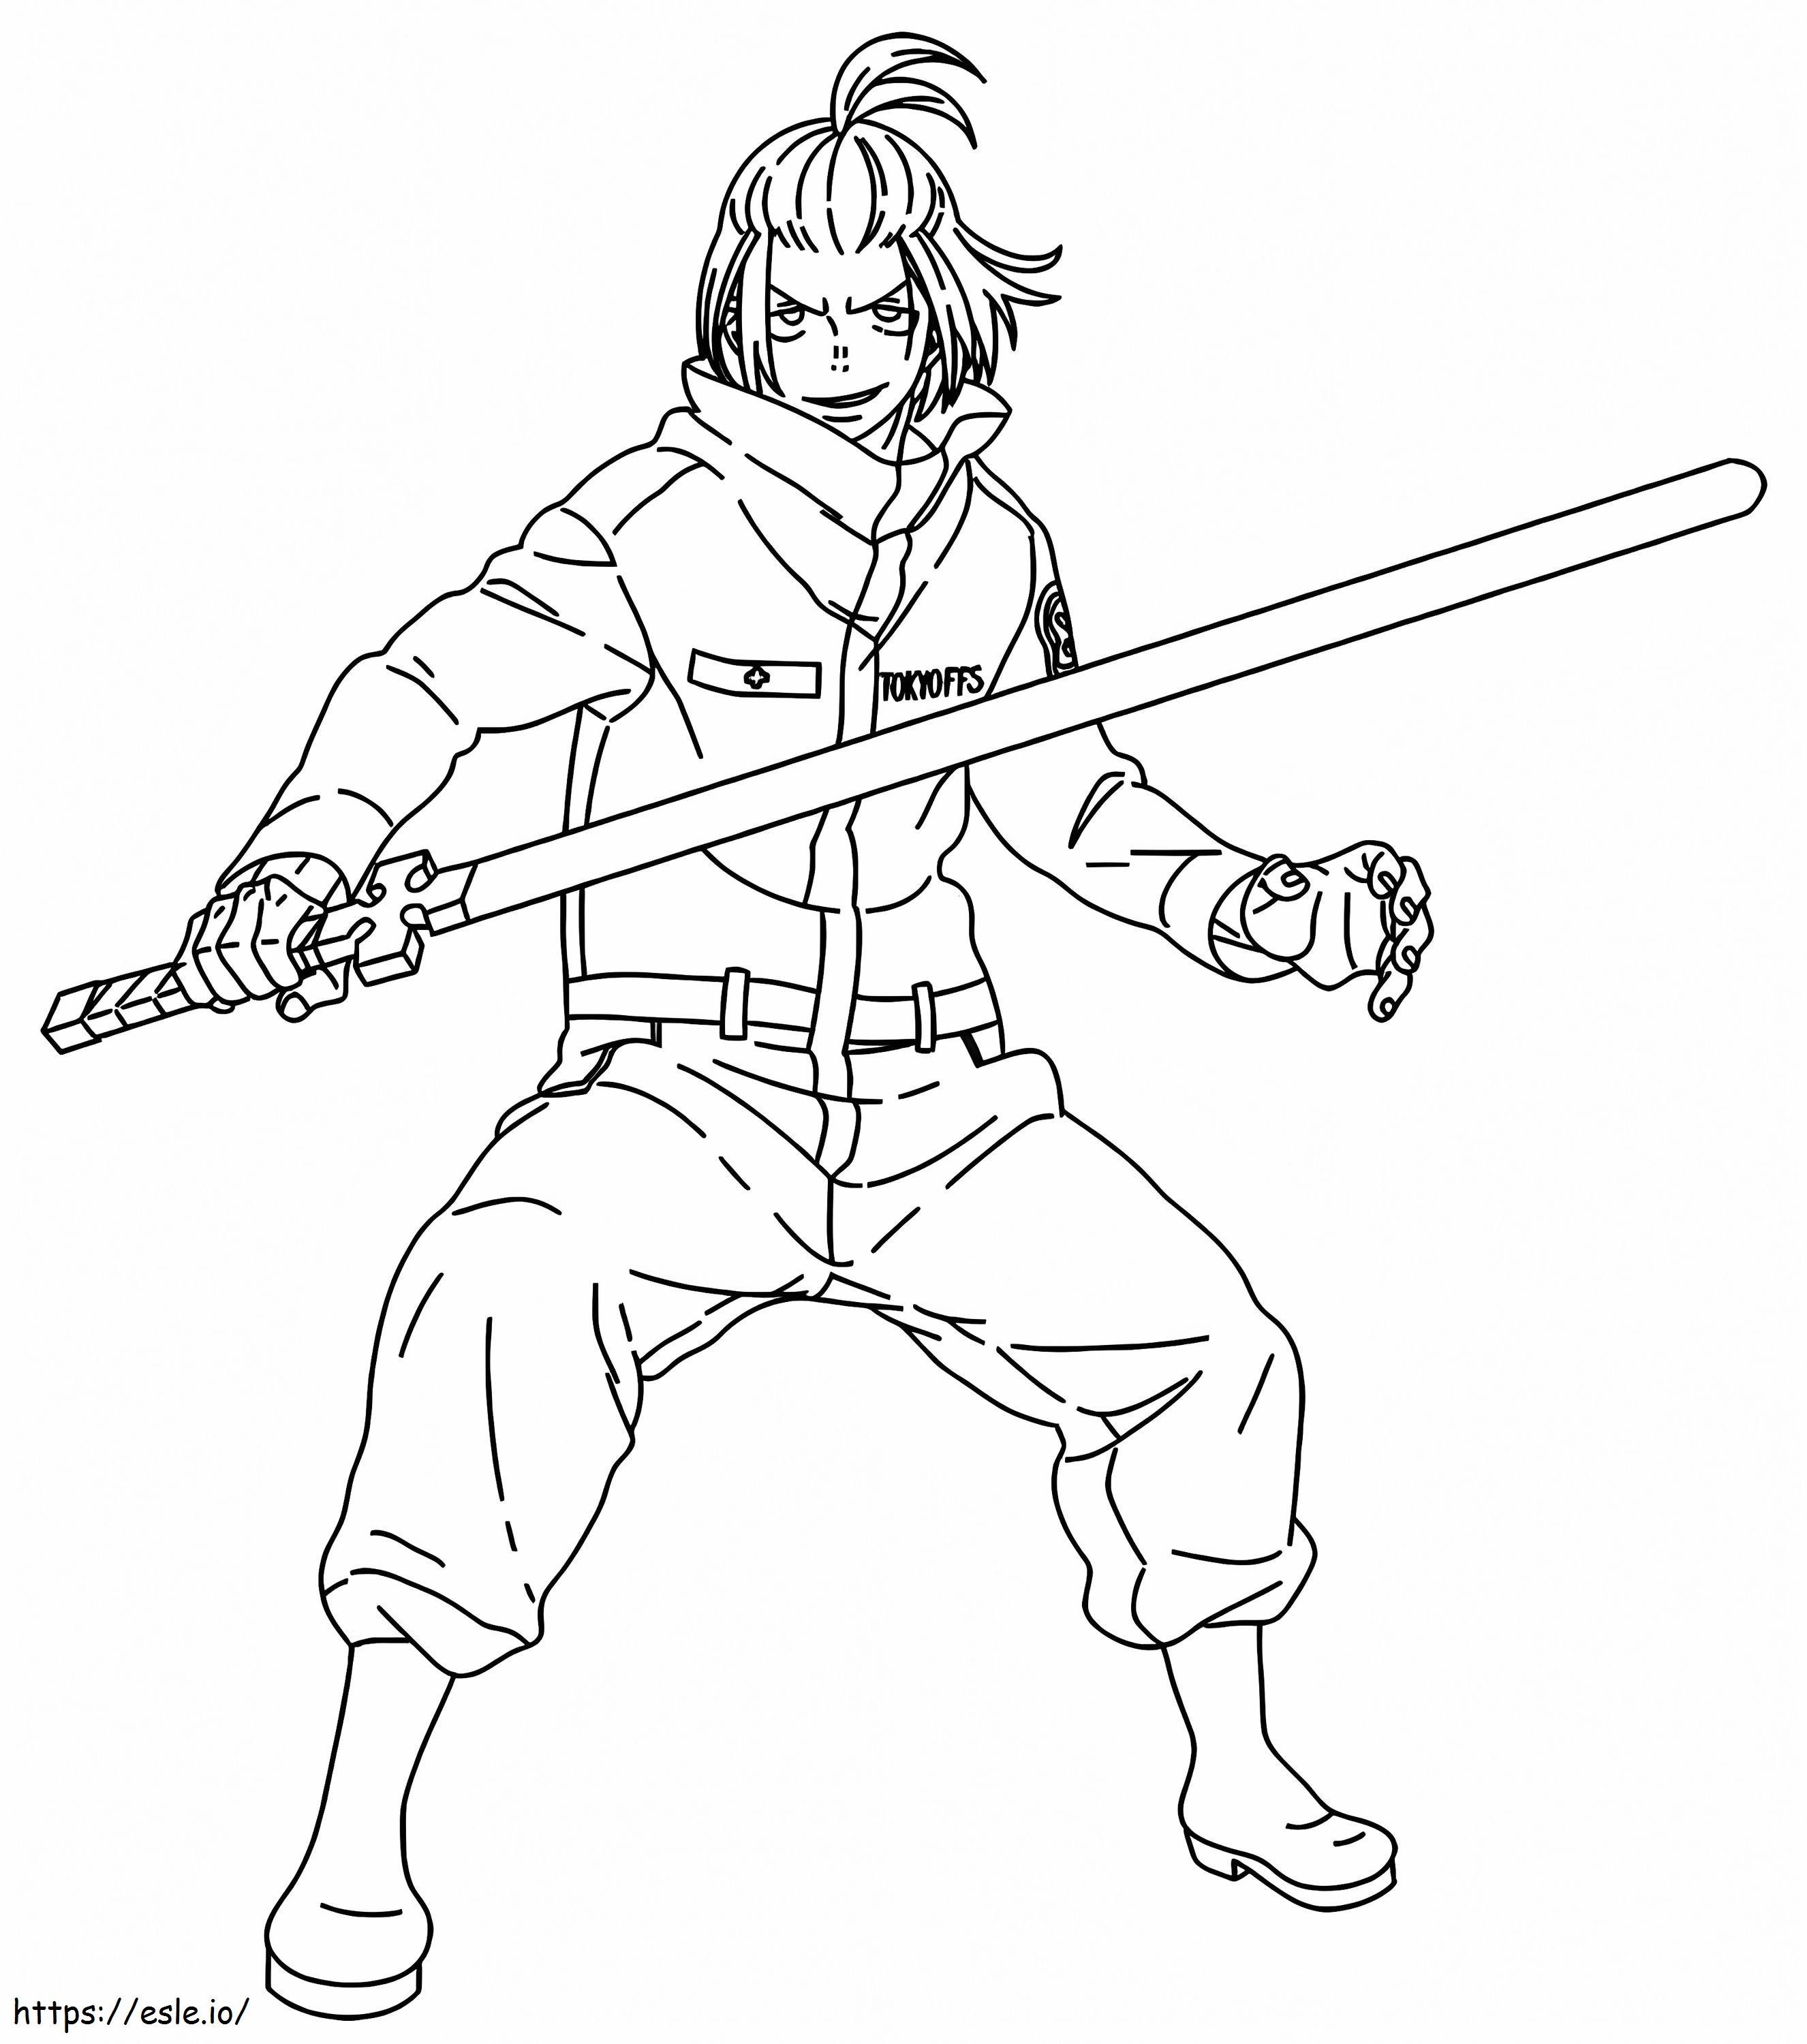 Arthur Boyle From Fire Force coloring page